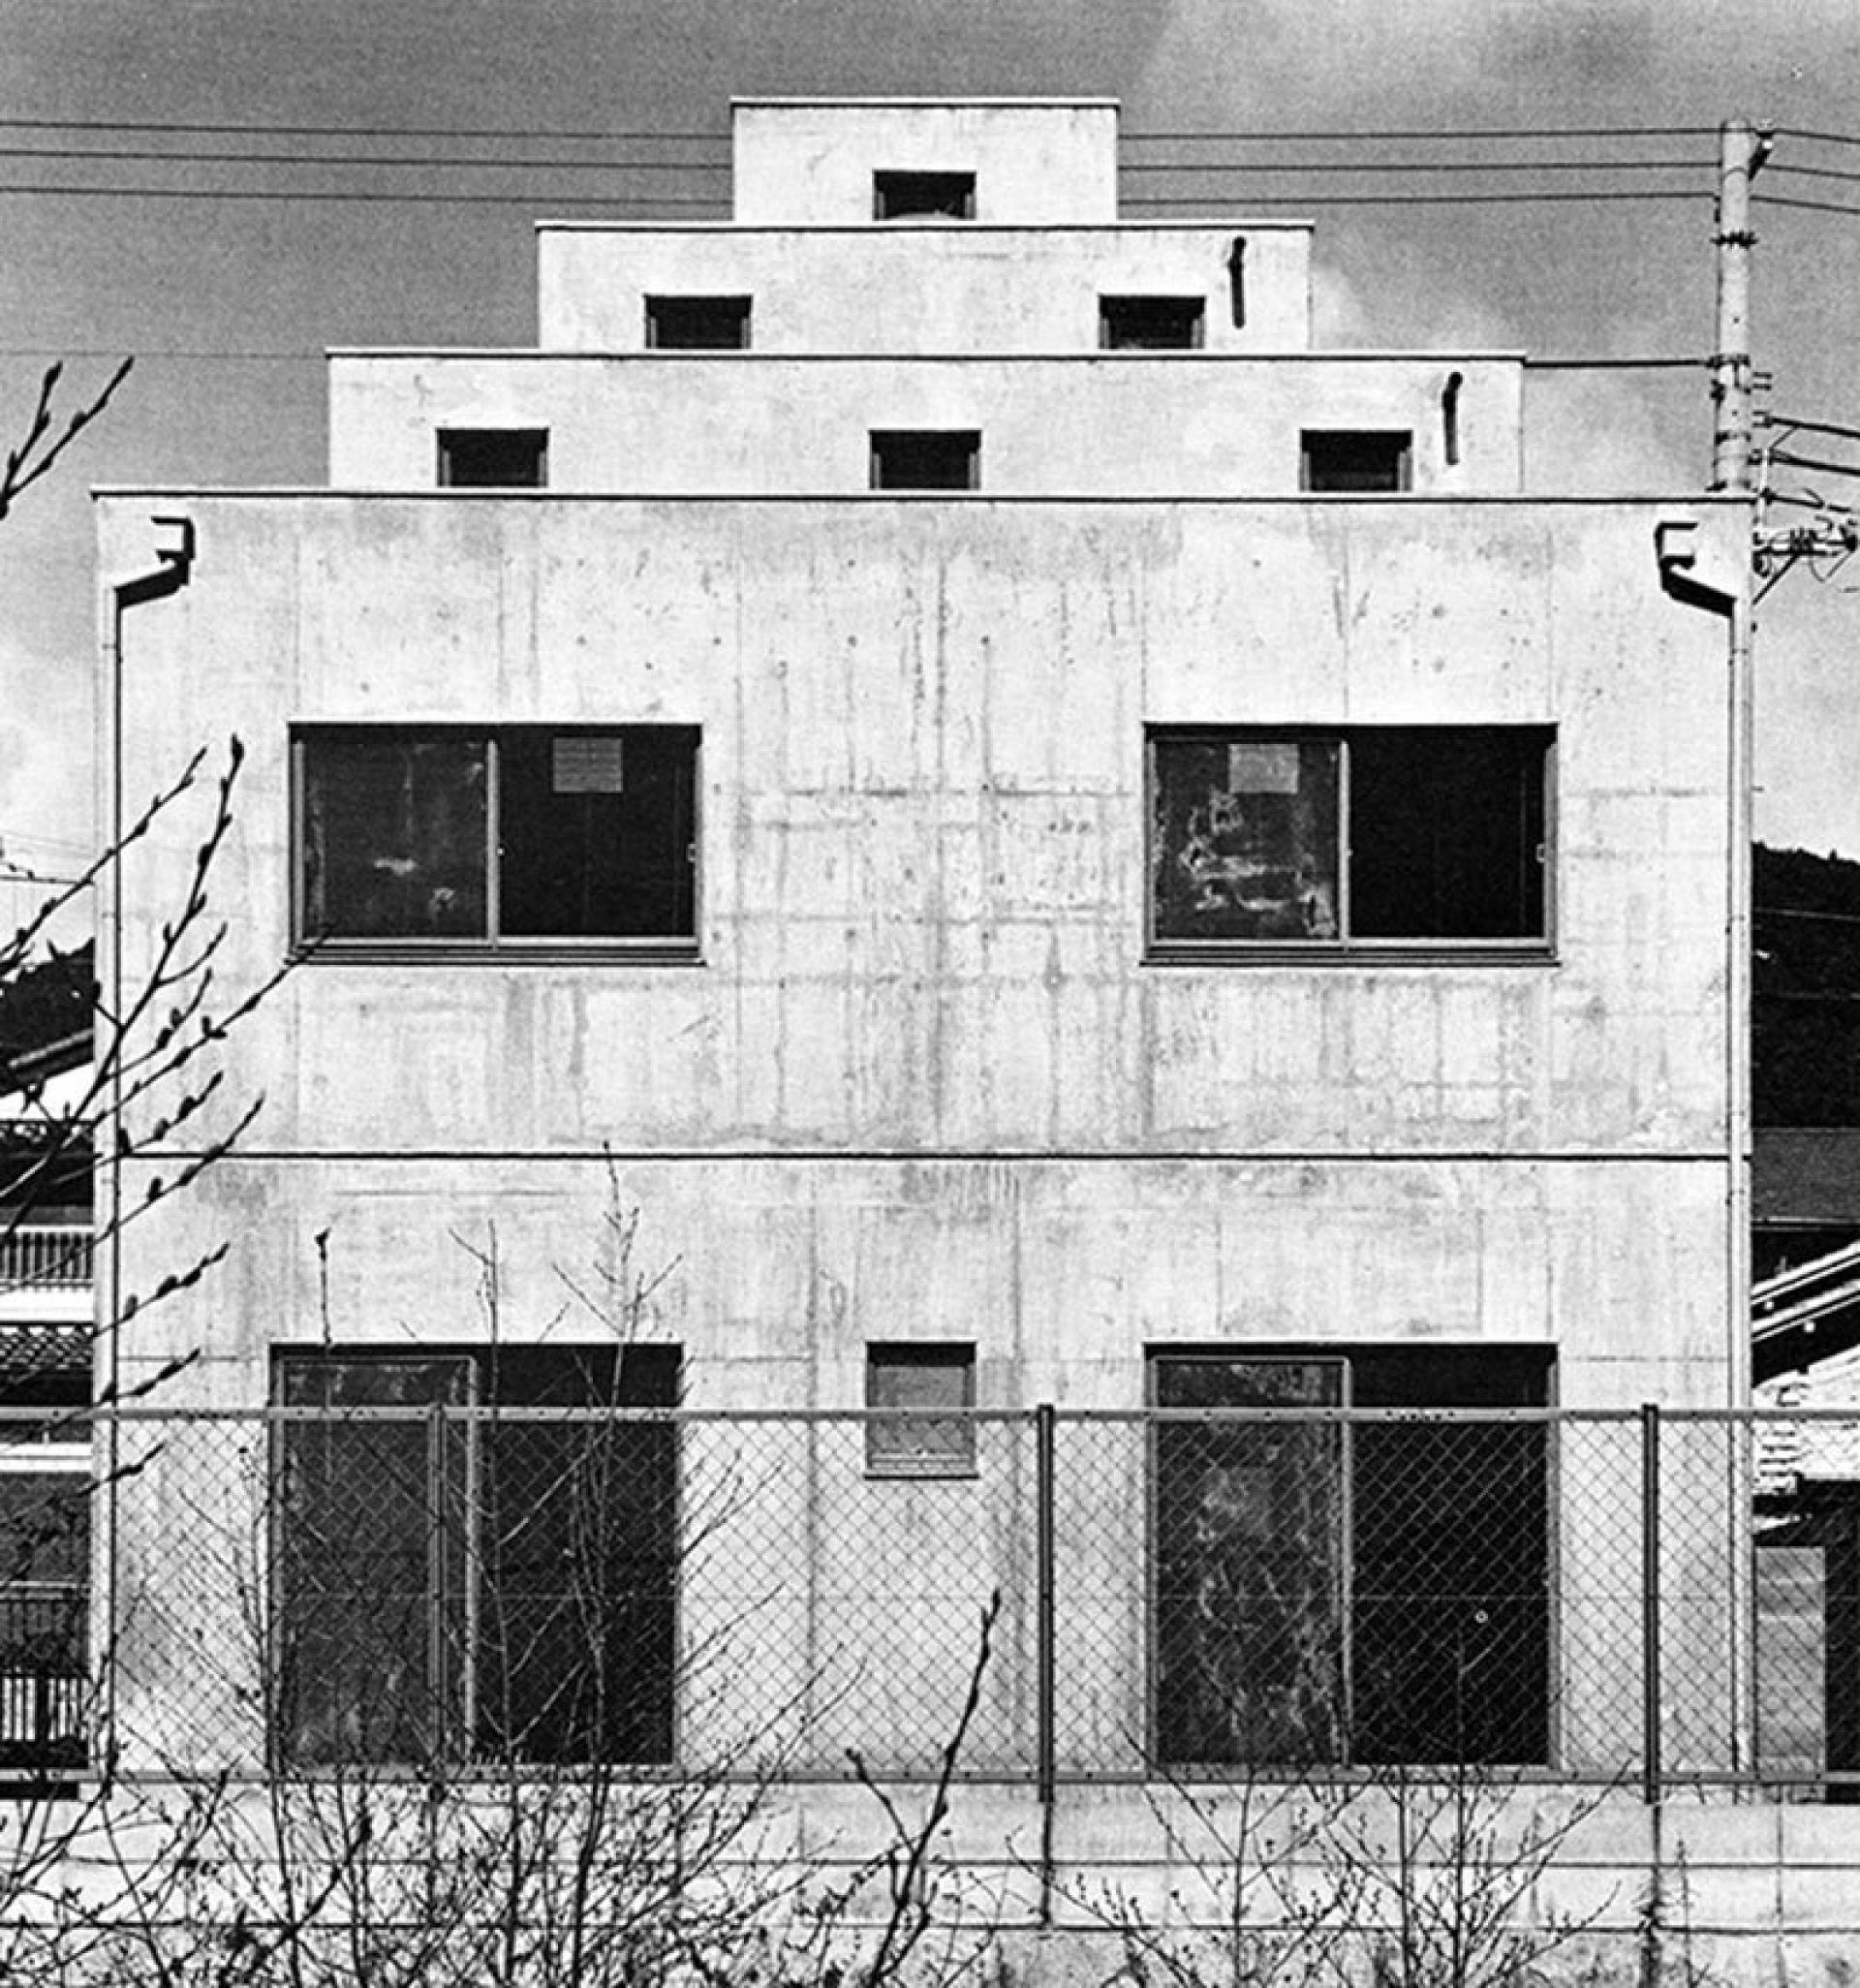 Nakano house is a reference to Loos’ project for the unbuilt Max Dvořák mausoleum.| Photo via Socks